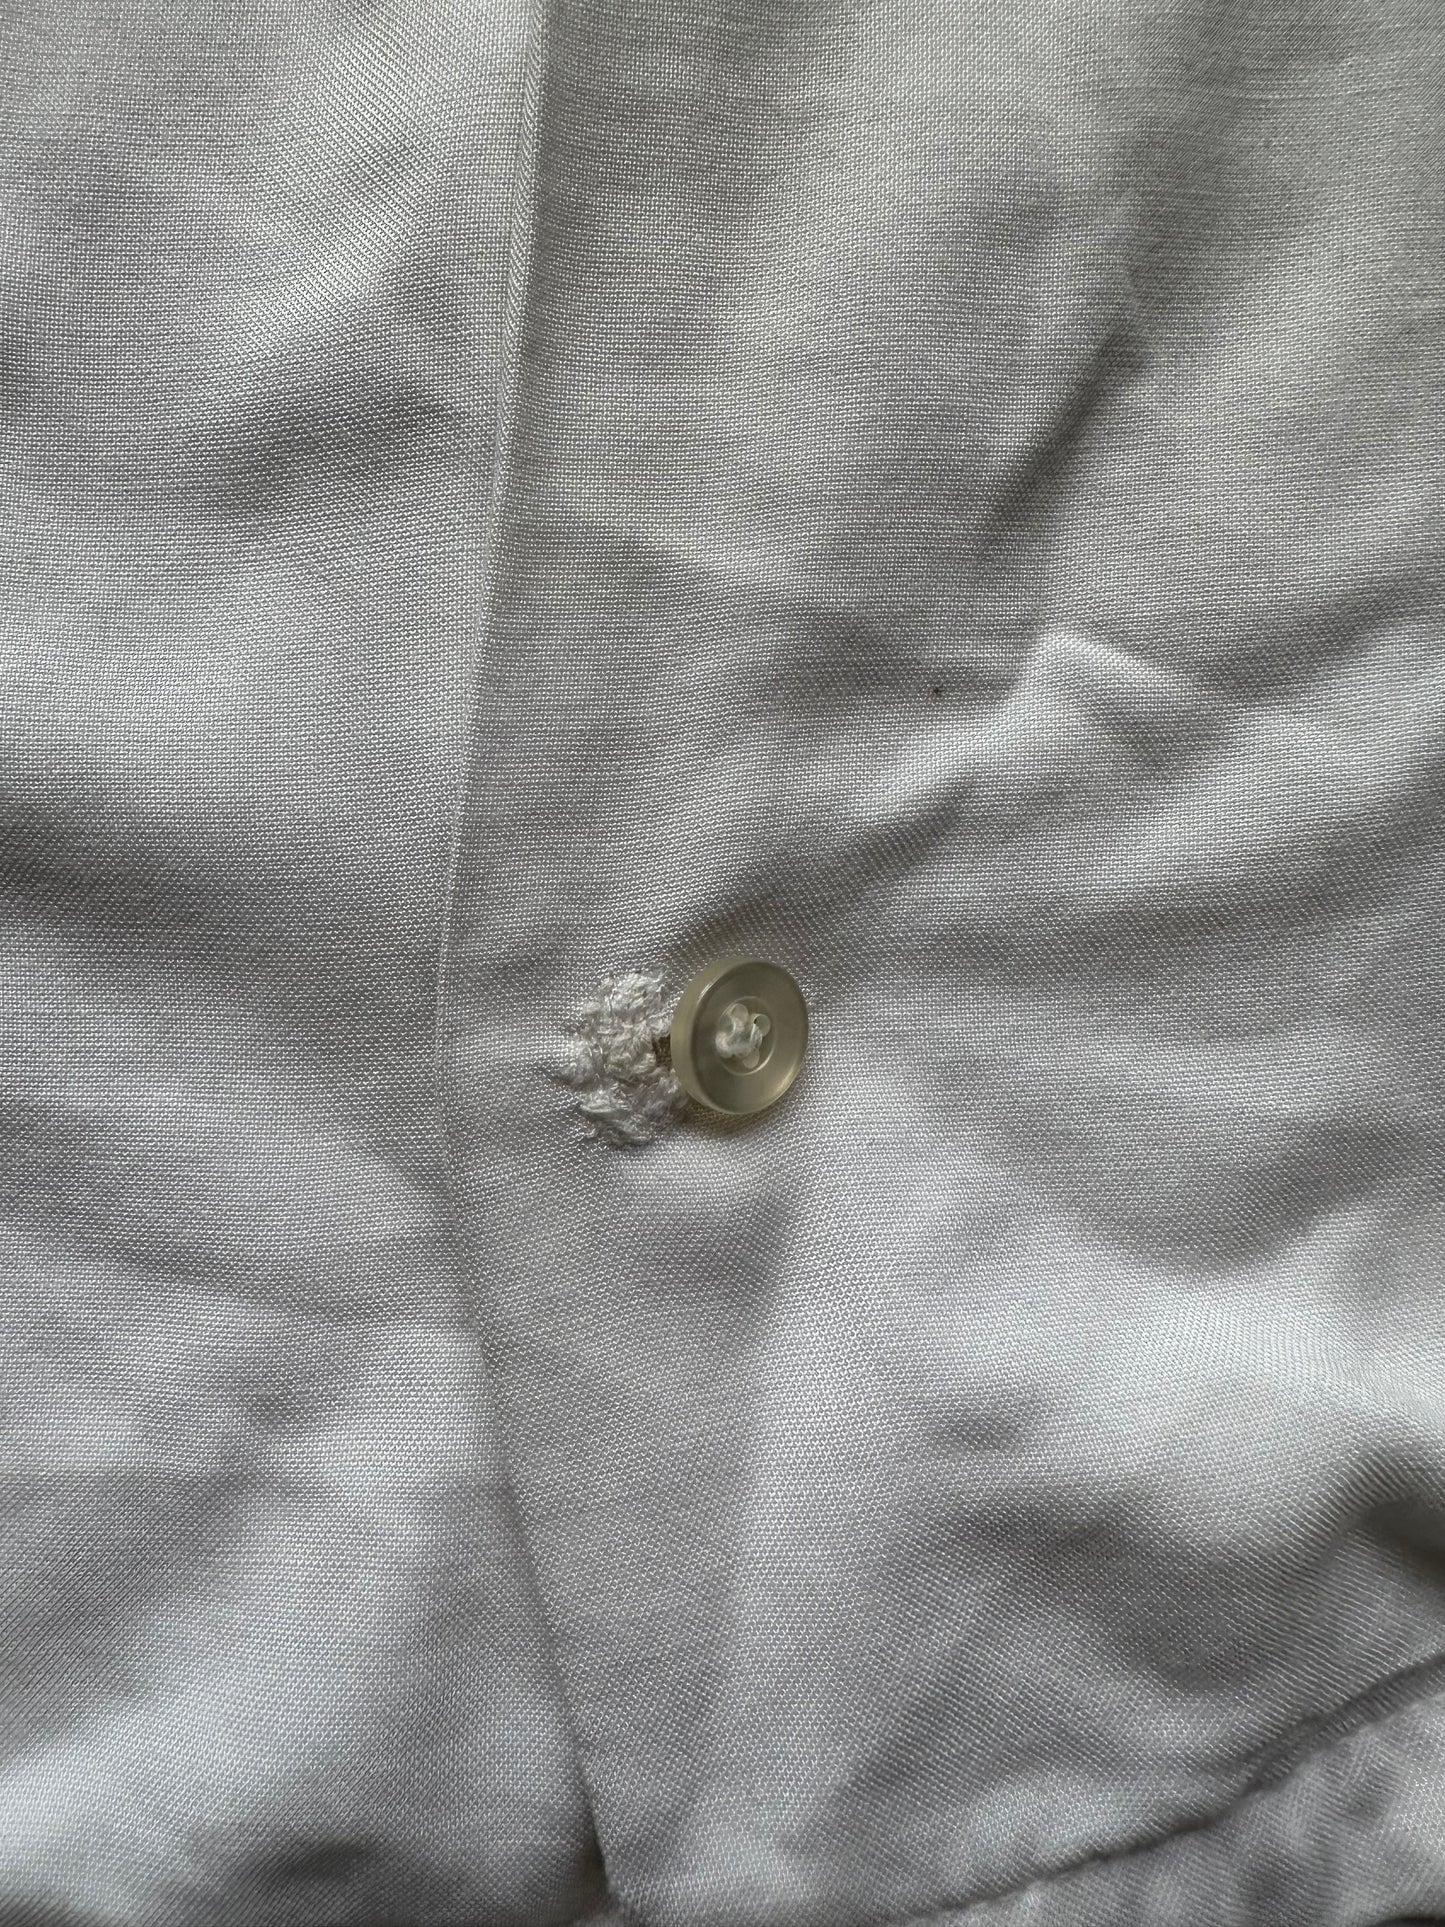 Bottom repaired button hole on Vintage "Standard Oil Co." Chainstitched Bowling Shirt SZ M | Vintage Bowling Shirt Seattle | Barn Owl Vintage Seattle